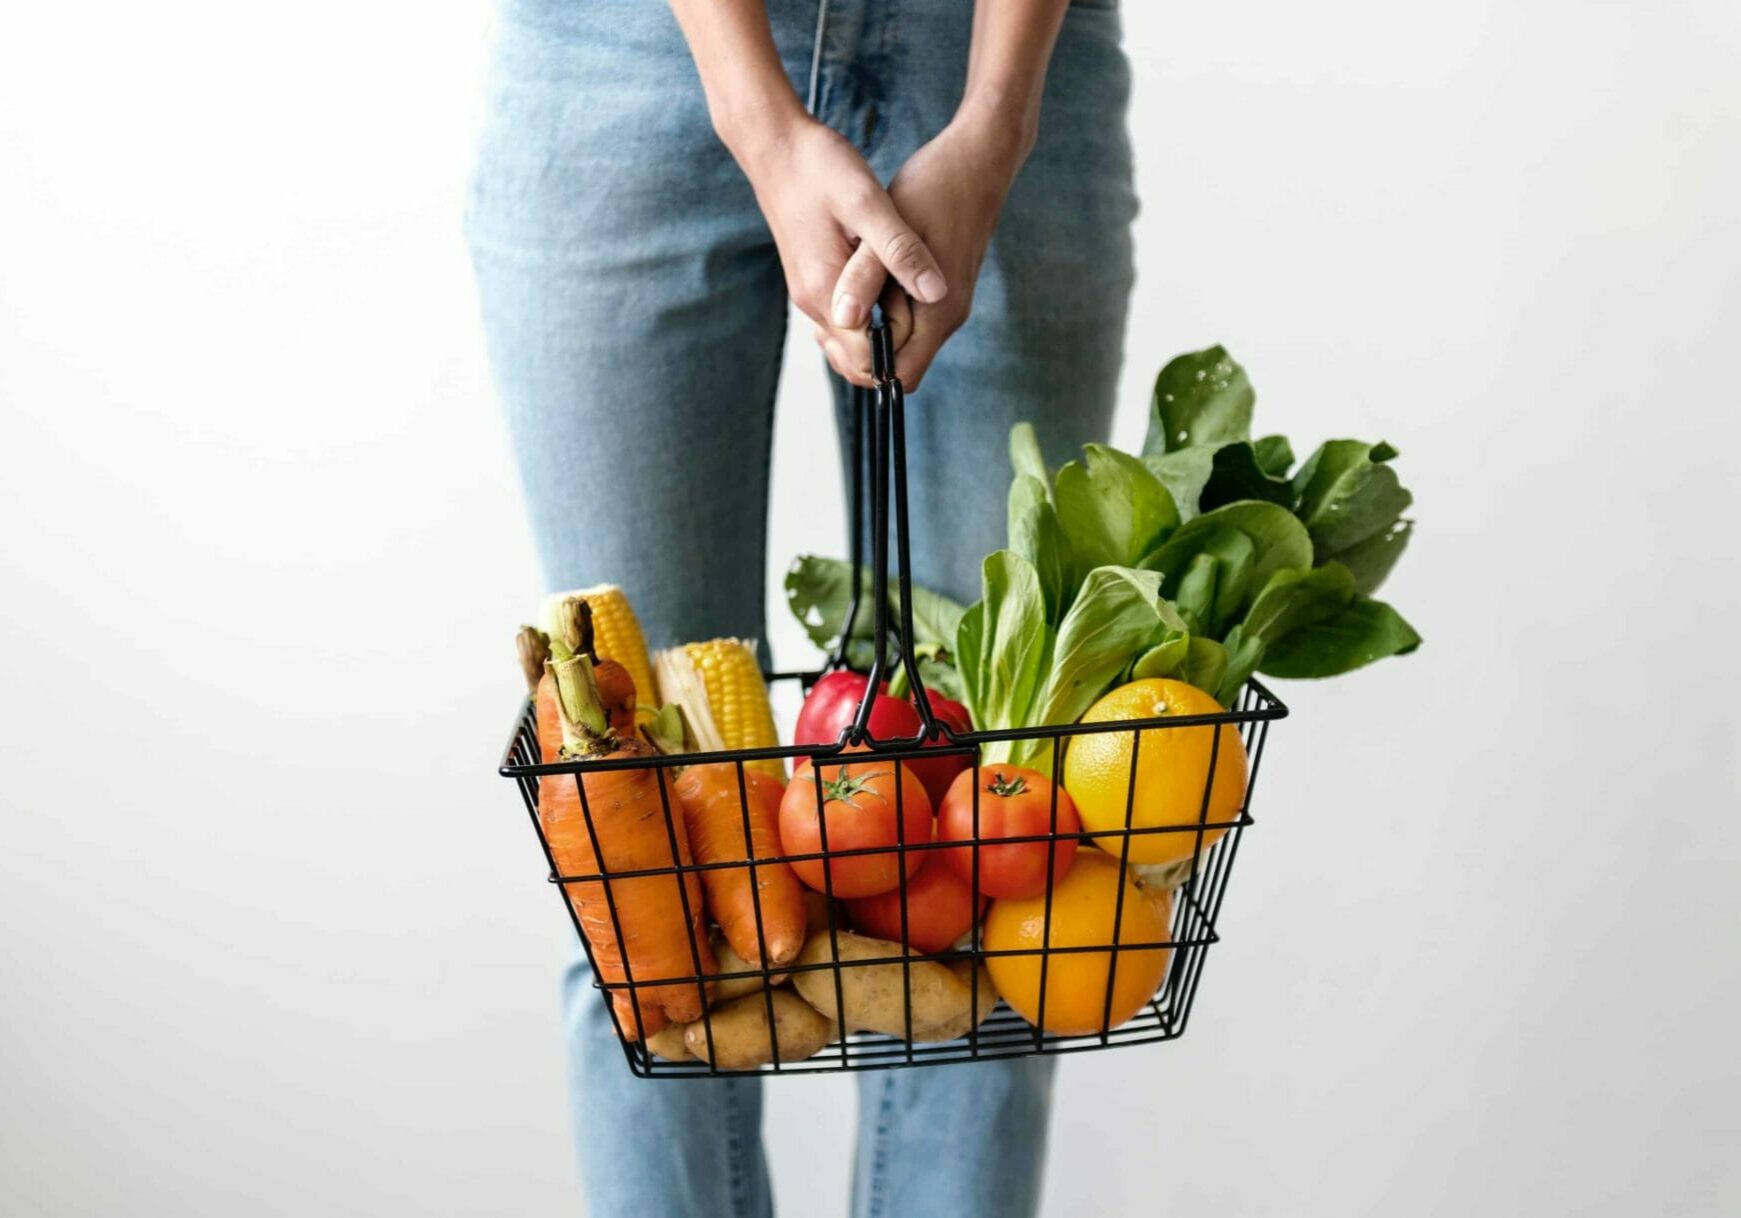 Person holding a basket full of vegetables